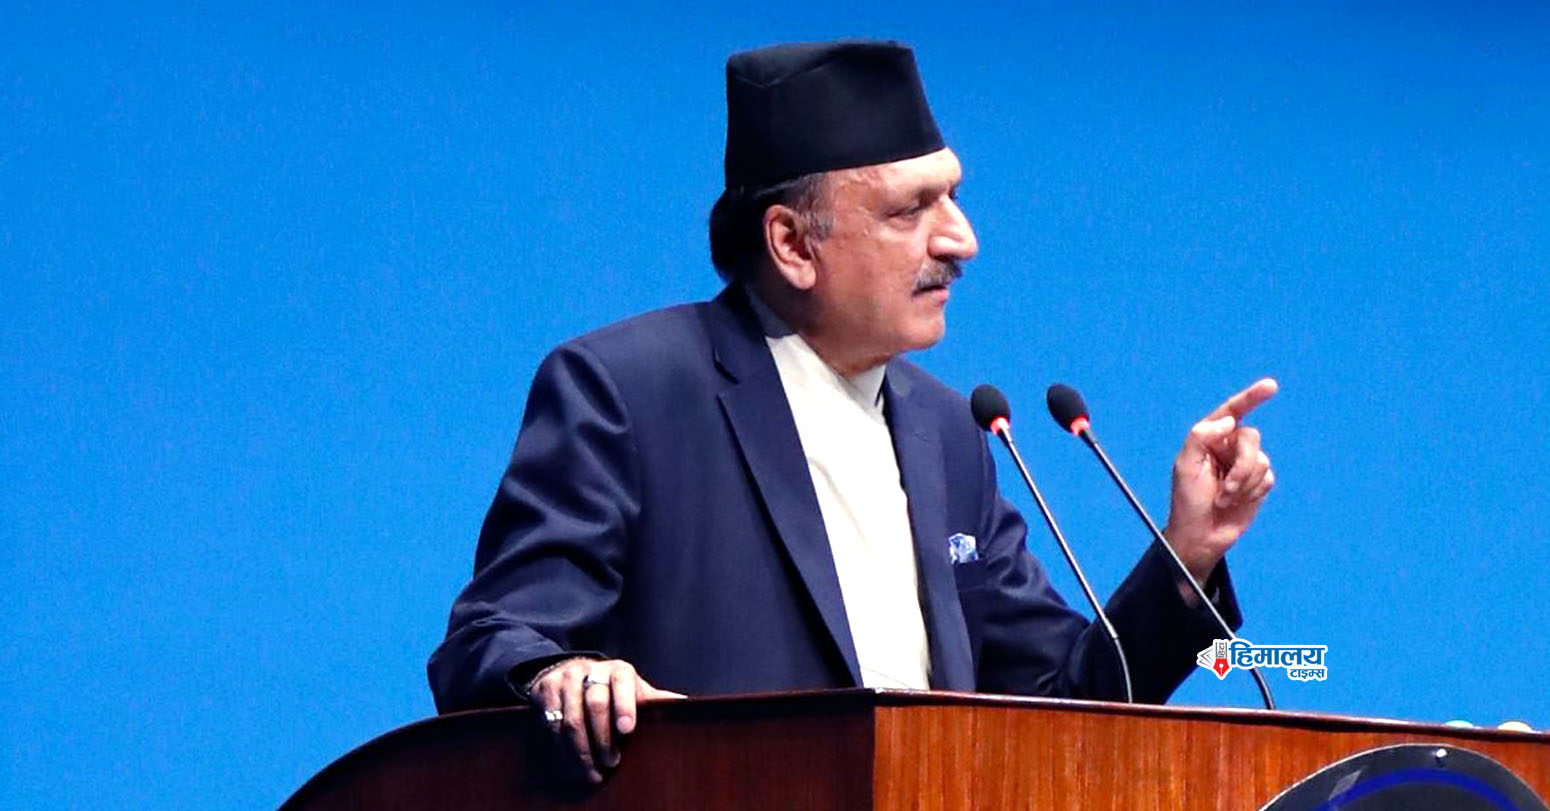 My Integrity Has Not Budged: Finance Minister Mahat